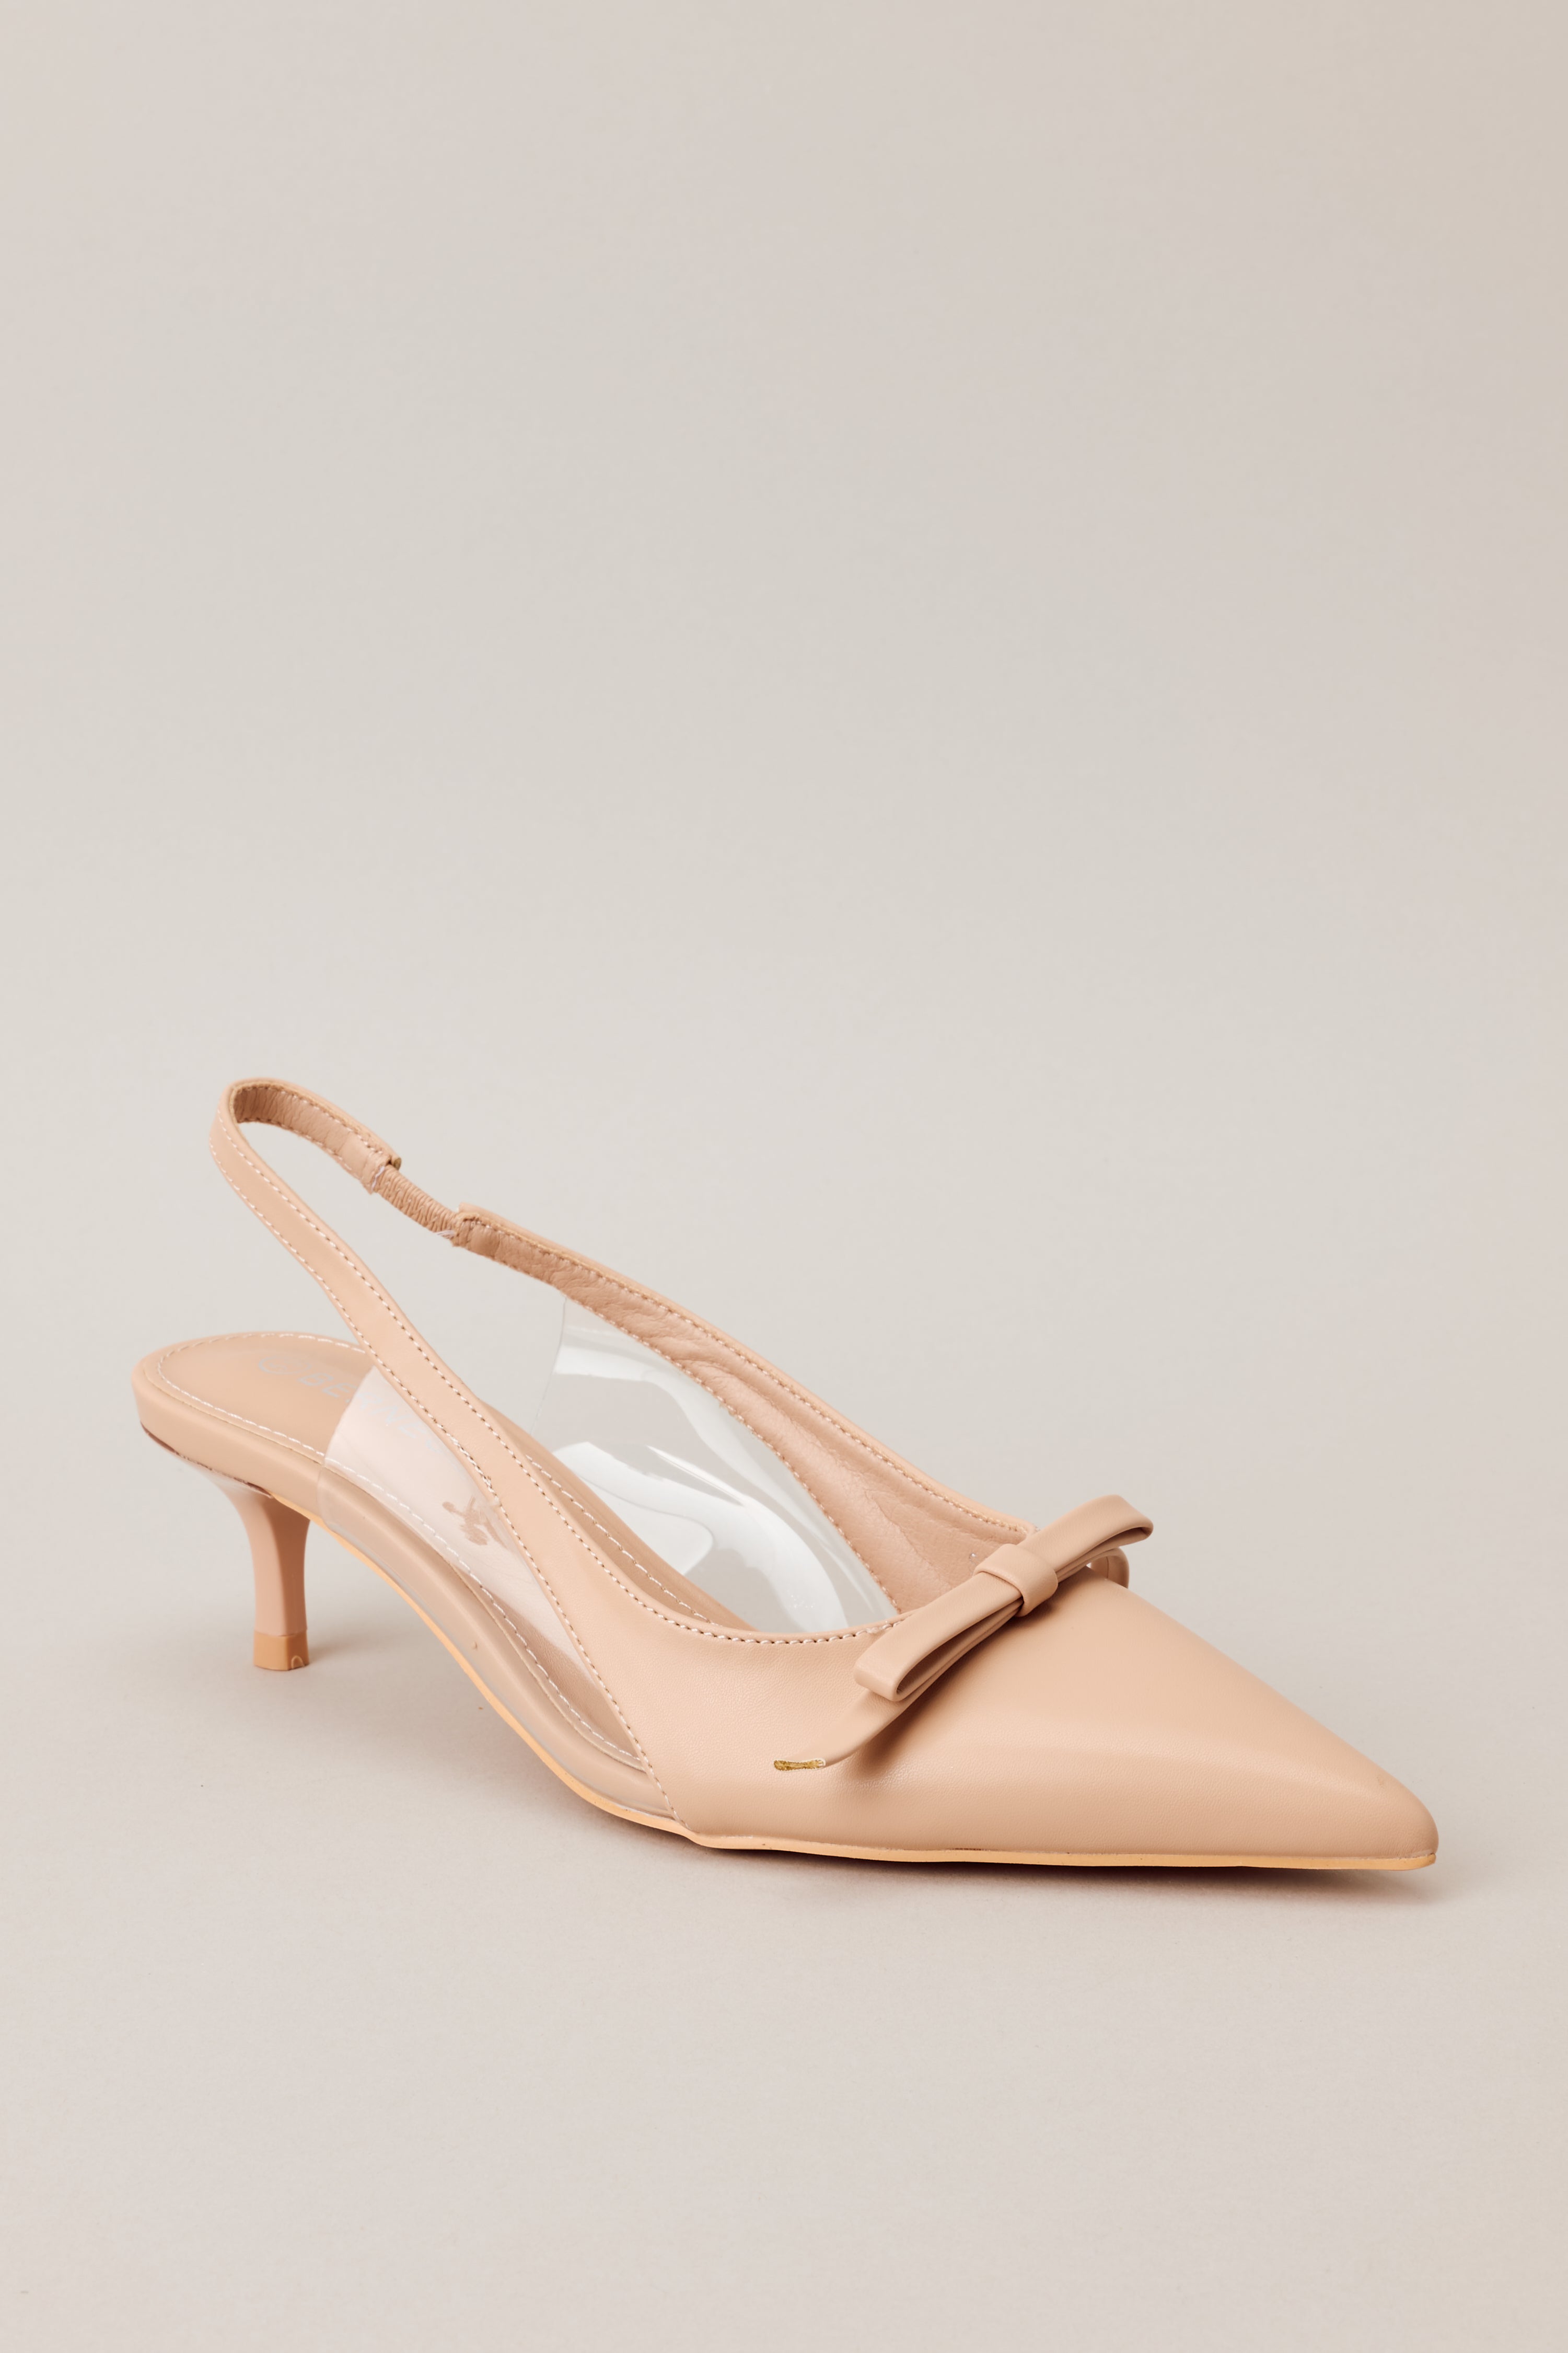 Close-up Front angled view of beige kitten heels featuring a pointed closed toe, delicate bow detailing, a strap around the back of the foot, clear siding for extra support, and an extremely short heel